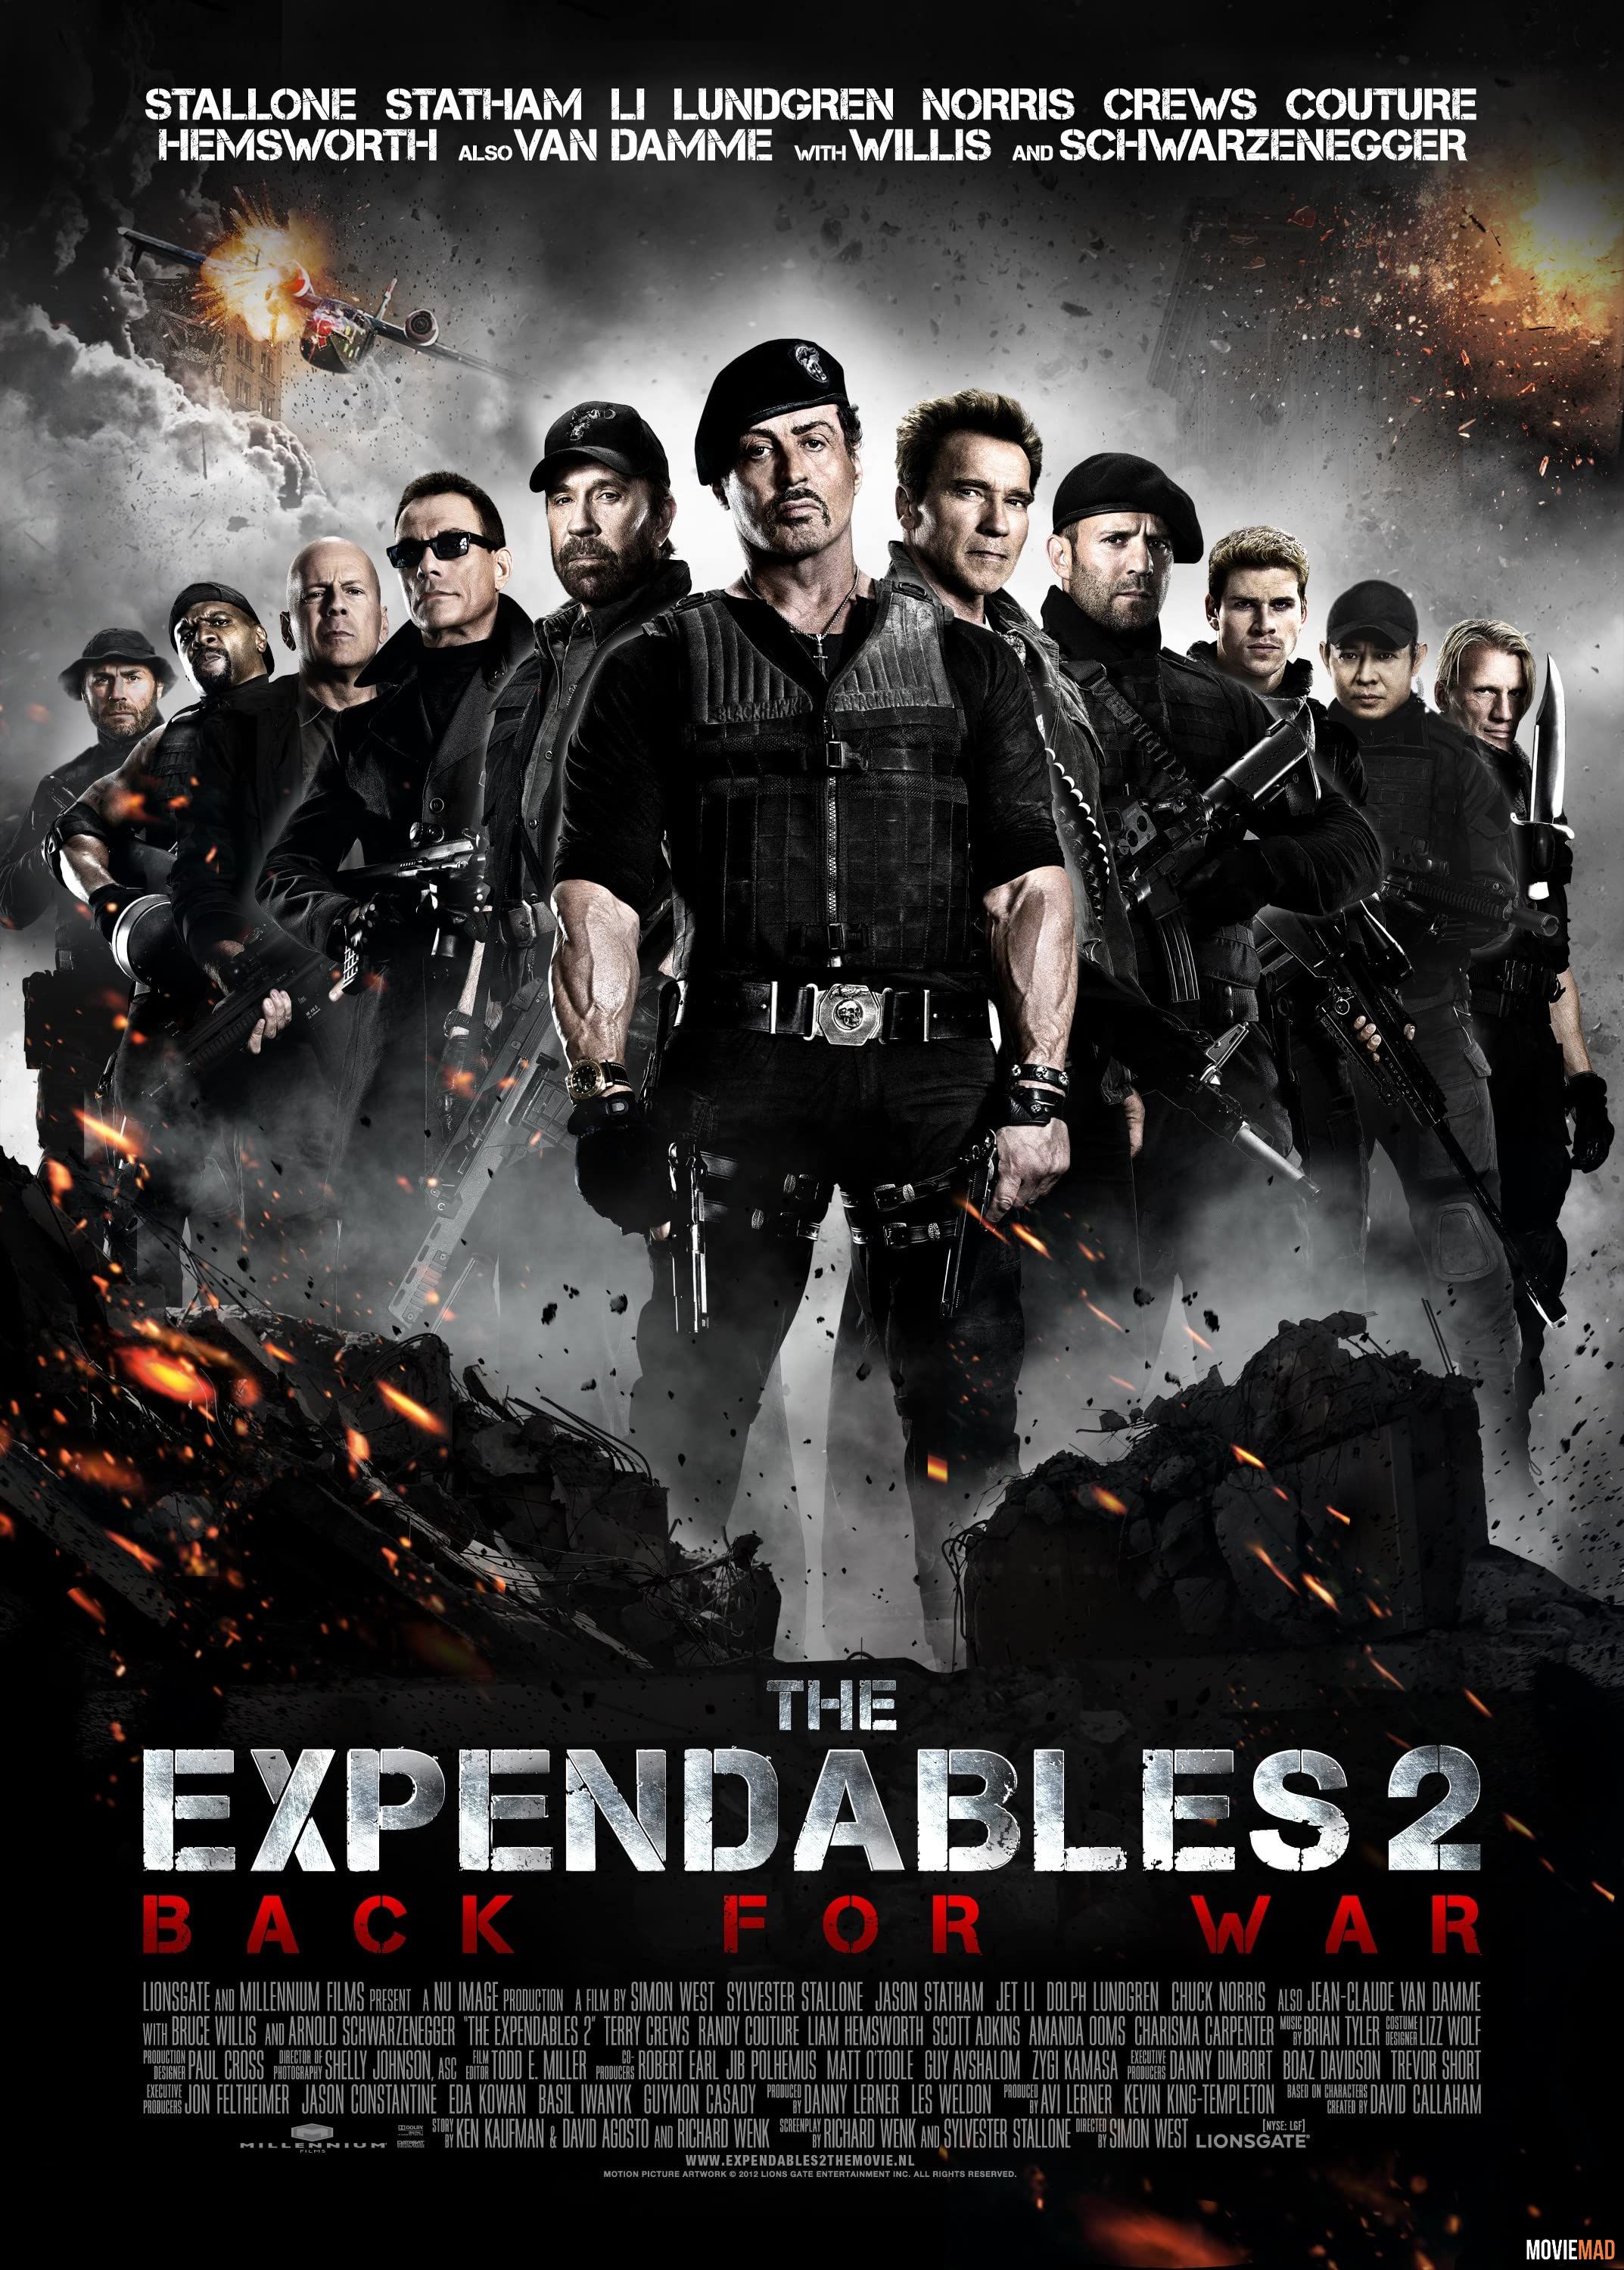 The Expendables 2 (2012) Hindi Dubbed ORG BluRay Full Movie 720p 480p